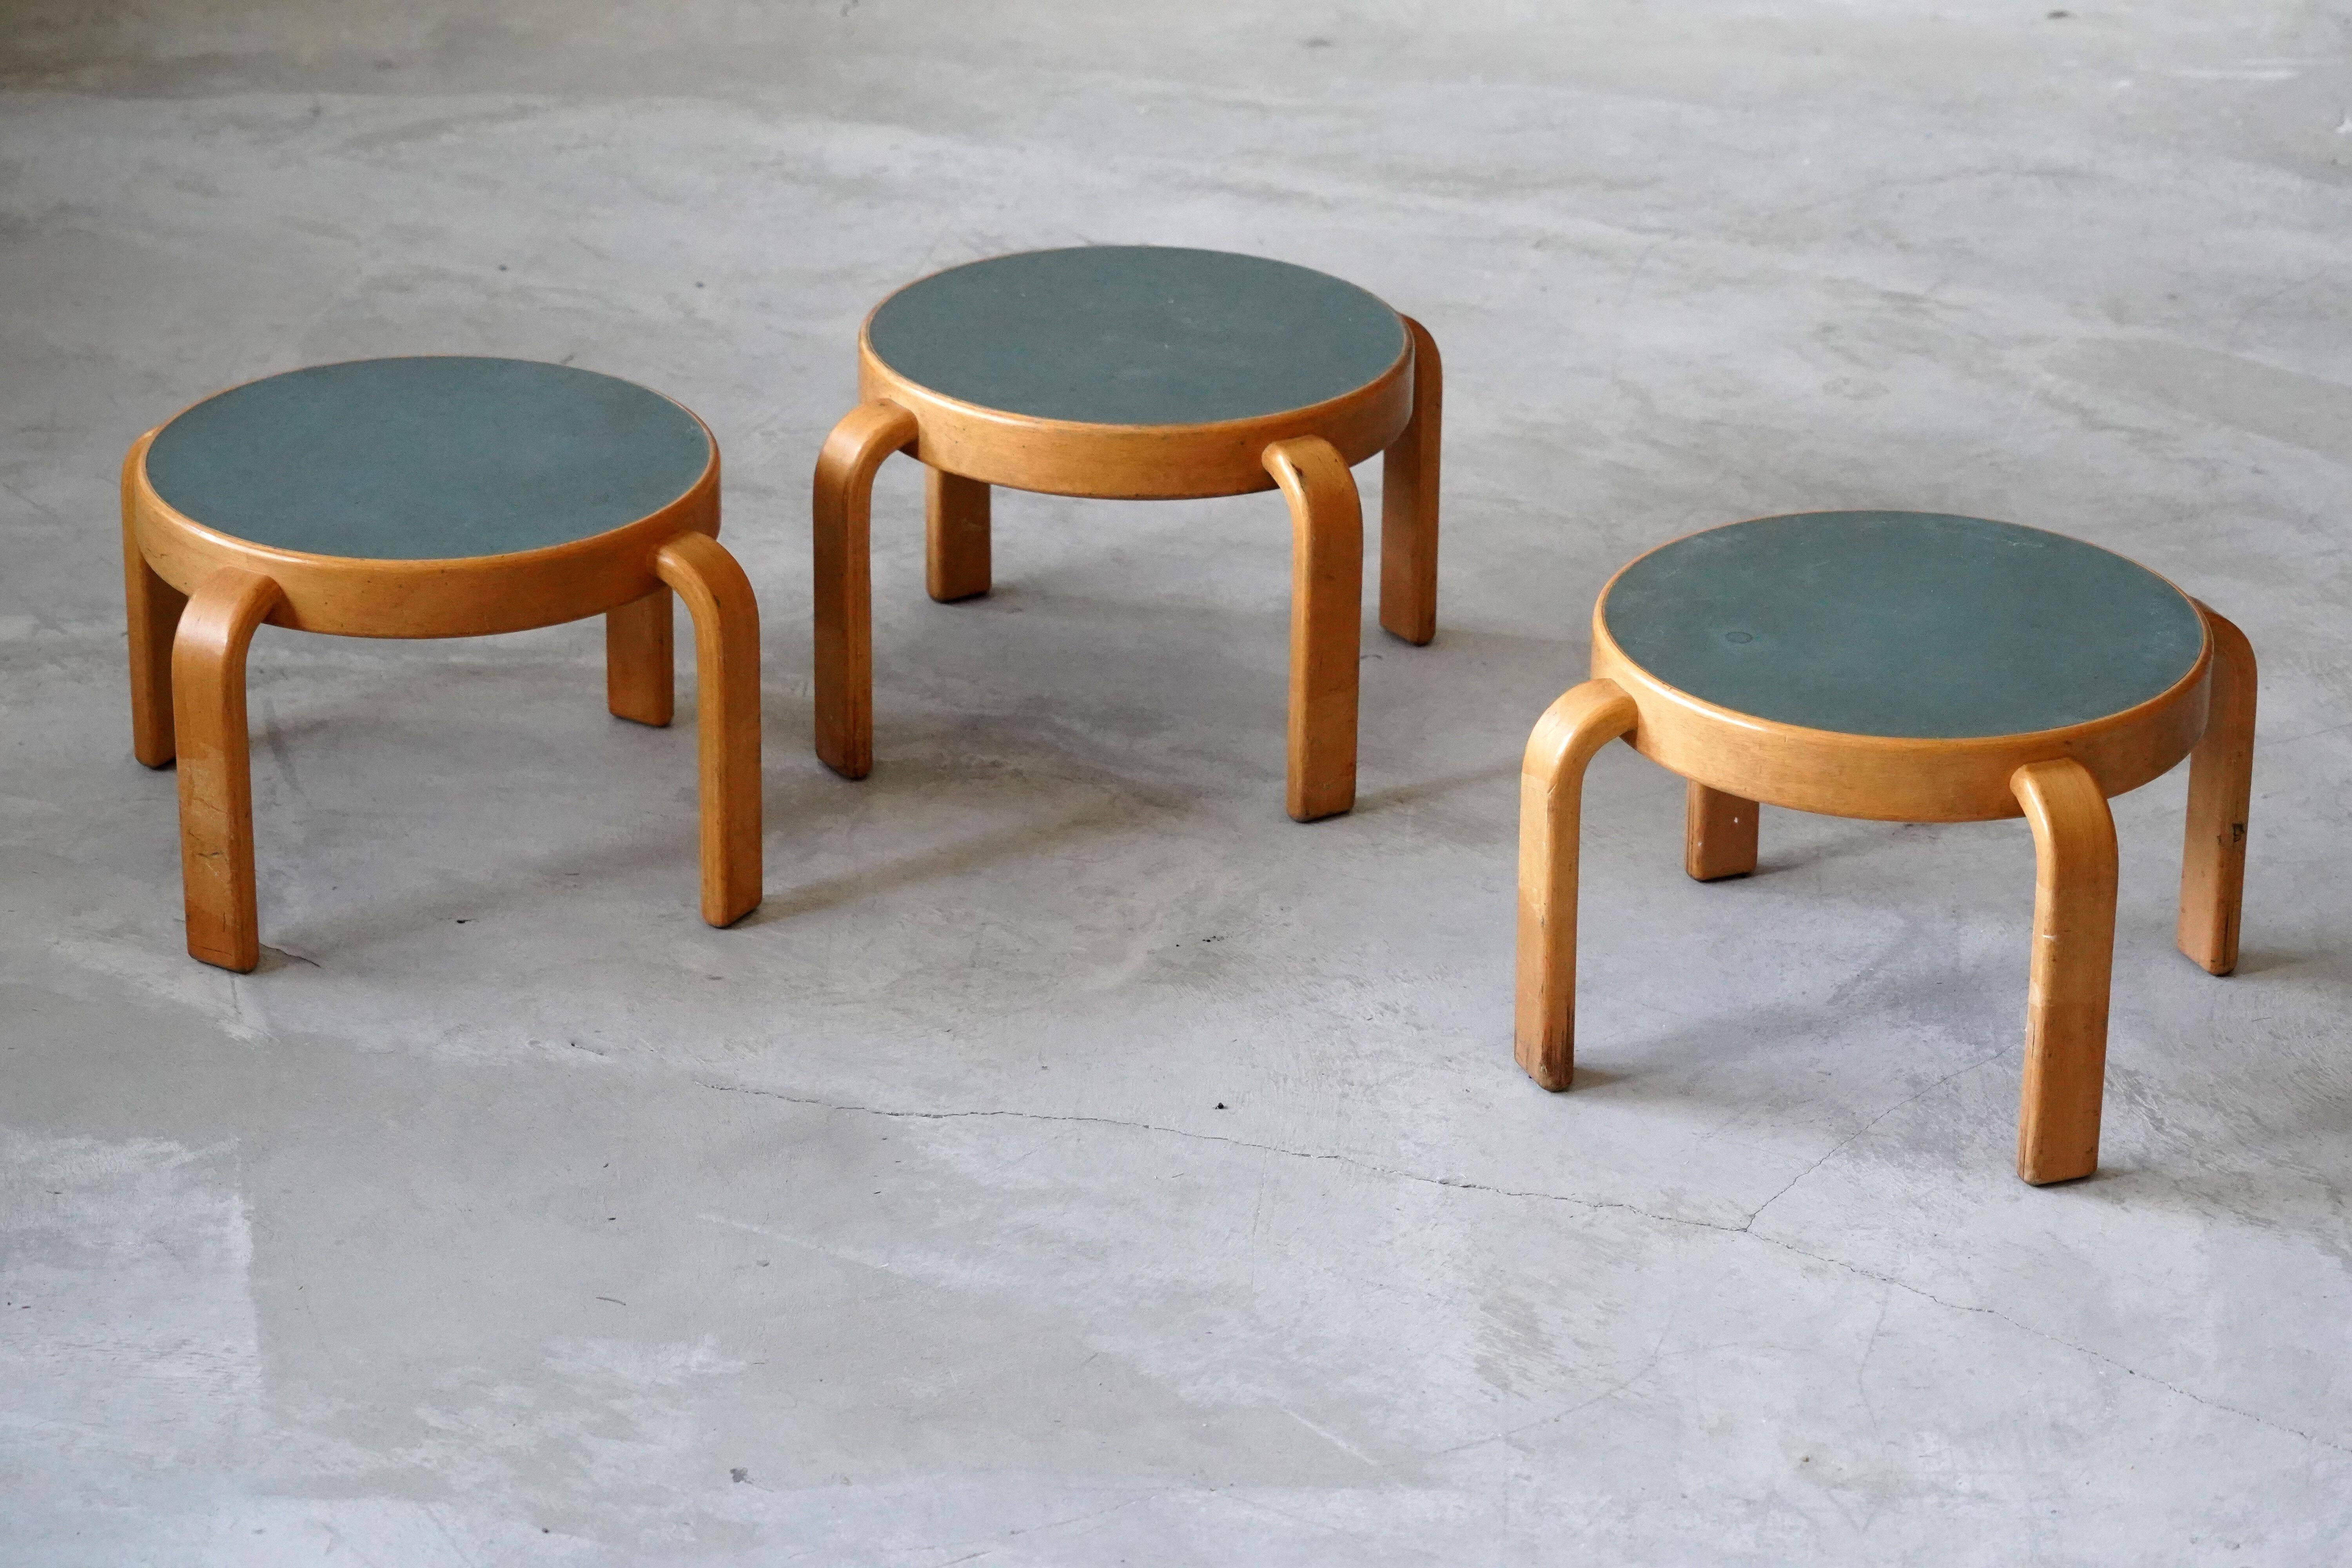 Magnus Olsen, Denmark, 1970s. With excellent original patina. Stackable

Other designers of the period include Charlotte Perriand, Pierre Chapo, Hans Wegner, and Arne Jacobsen.